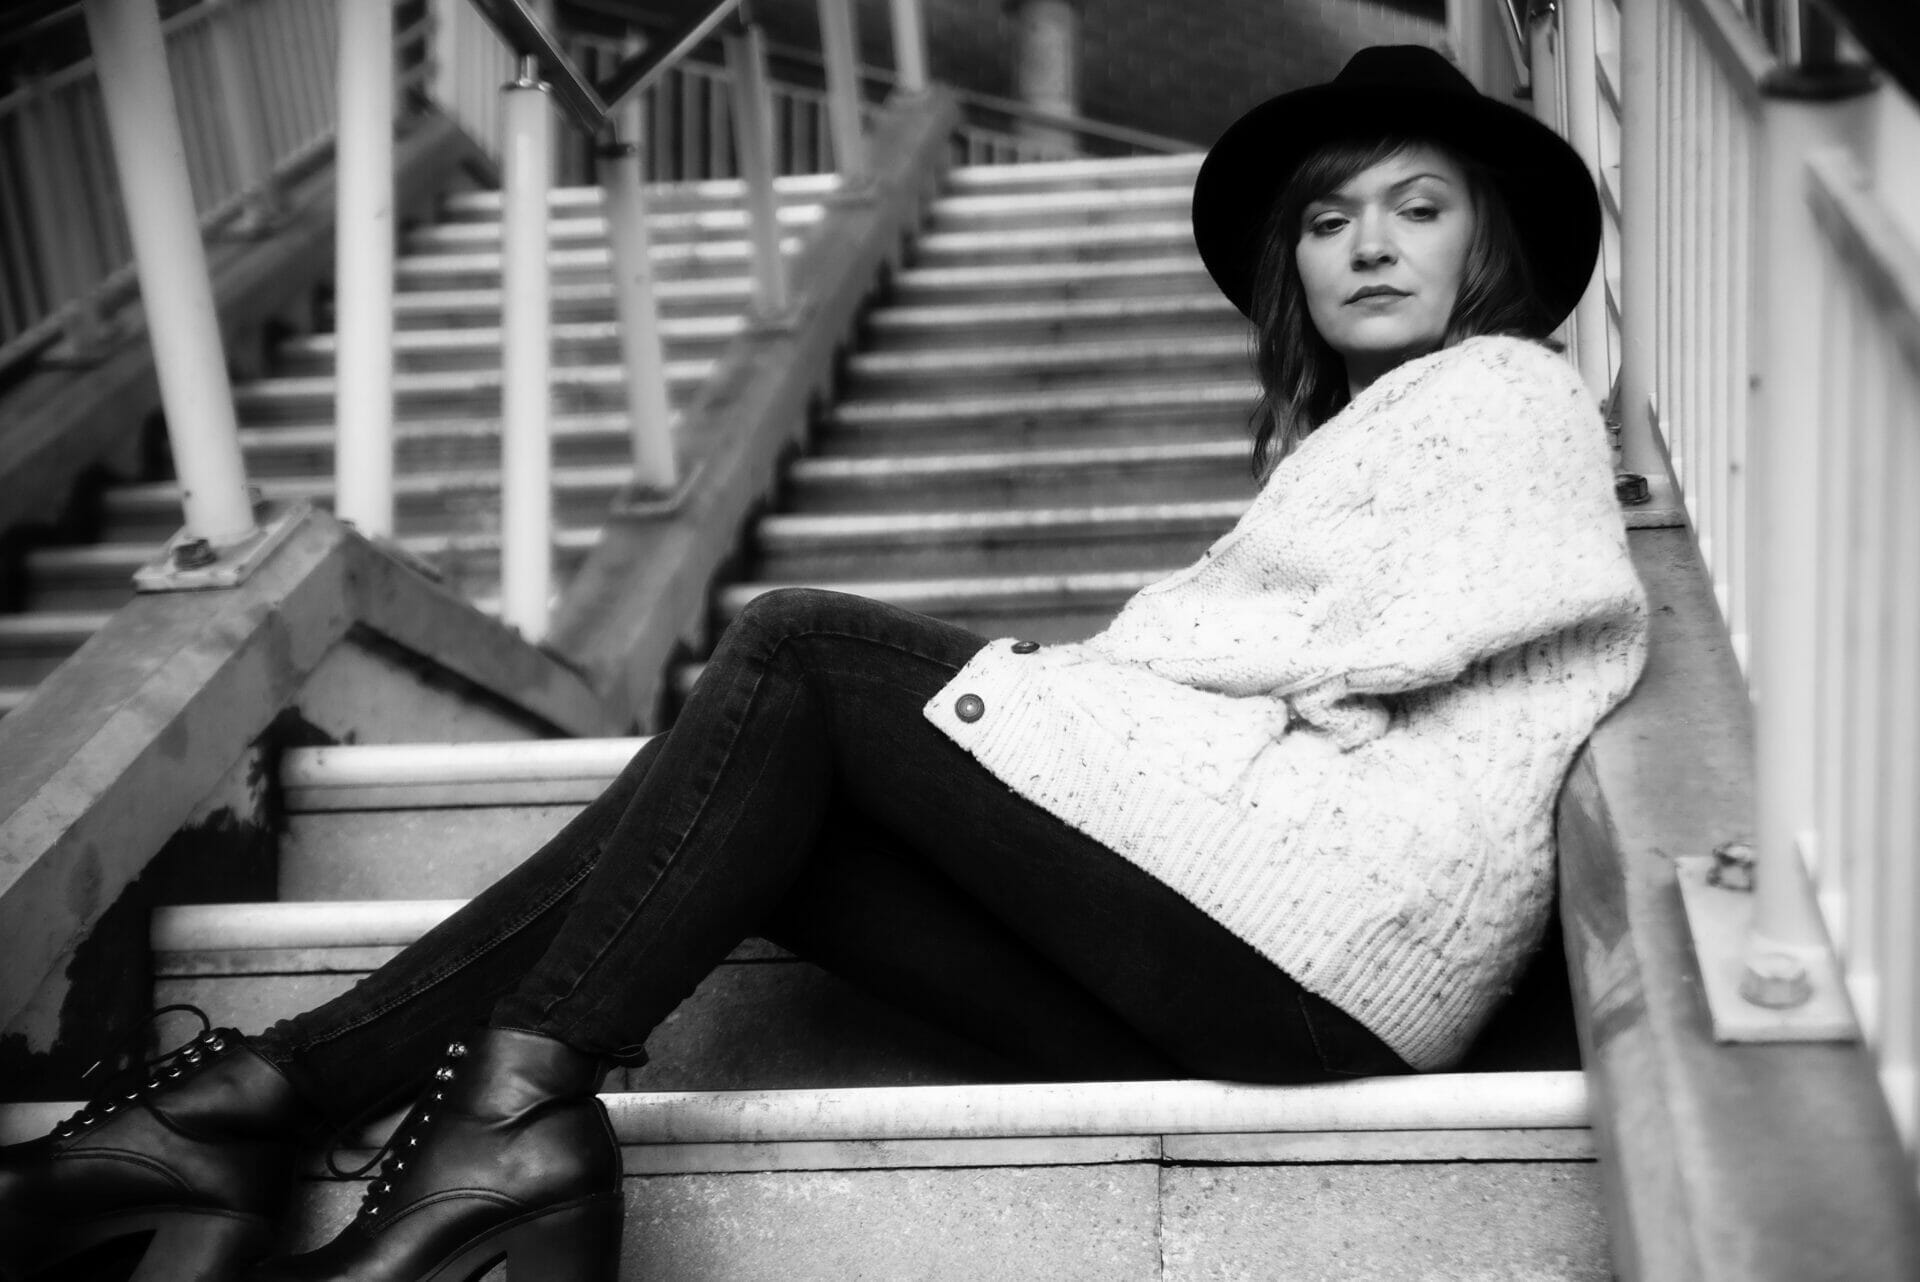 Winter Fashion in Liverpool - Off Camera Flash Photography - Black and White Photo of a Girl wearing a hat and Winter clothing siting on steps